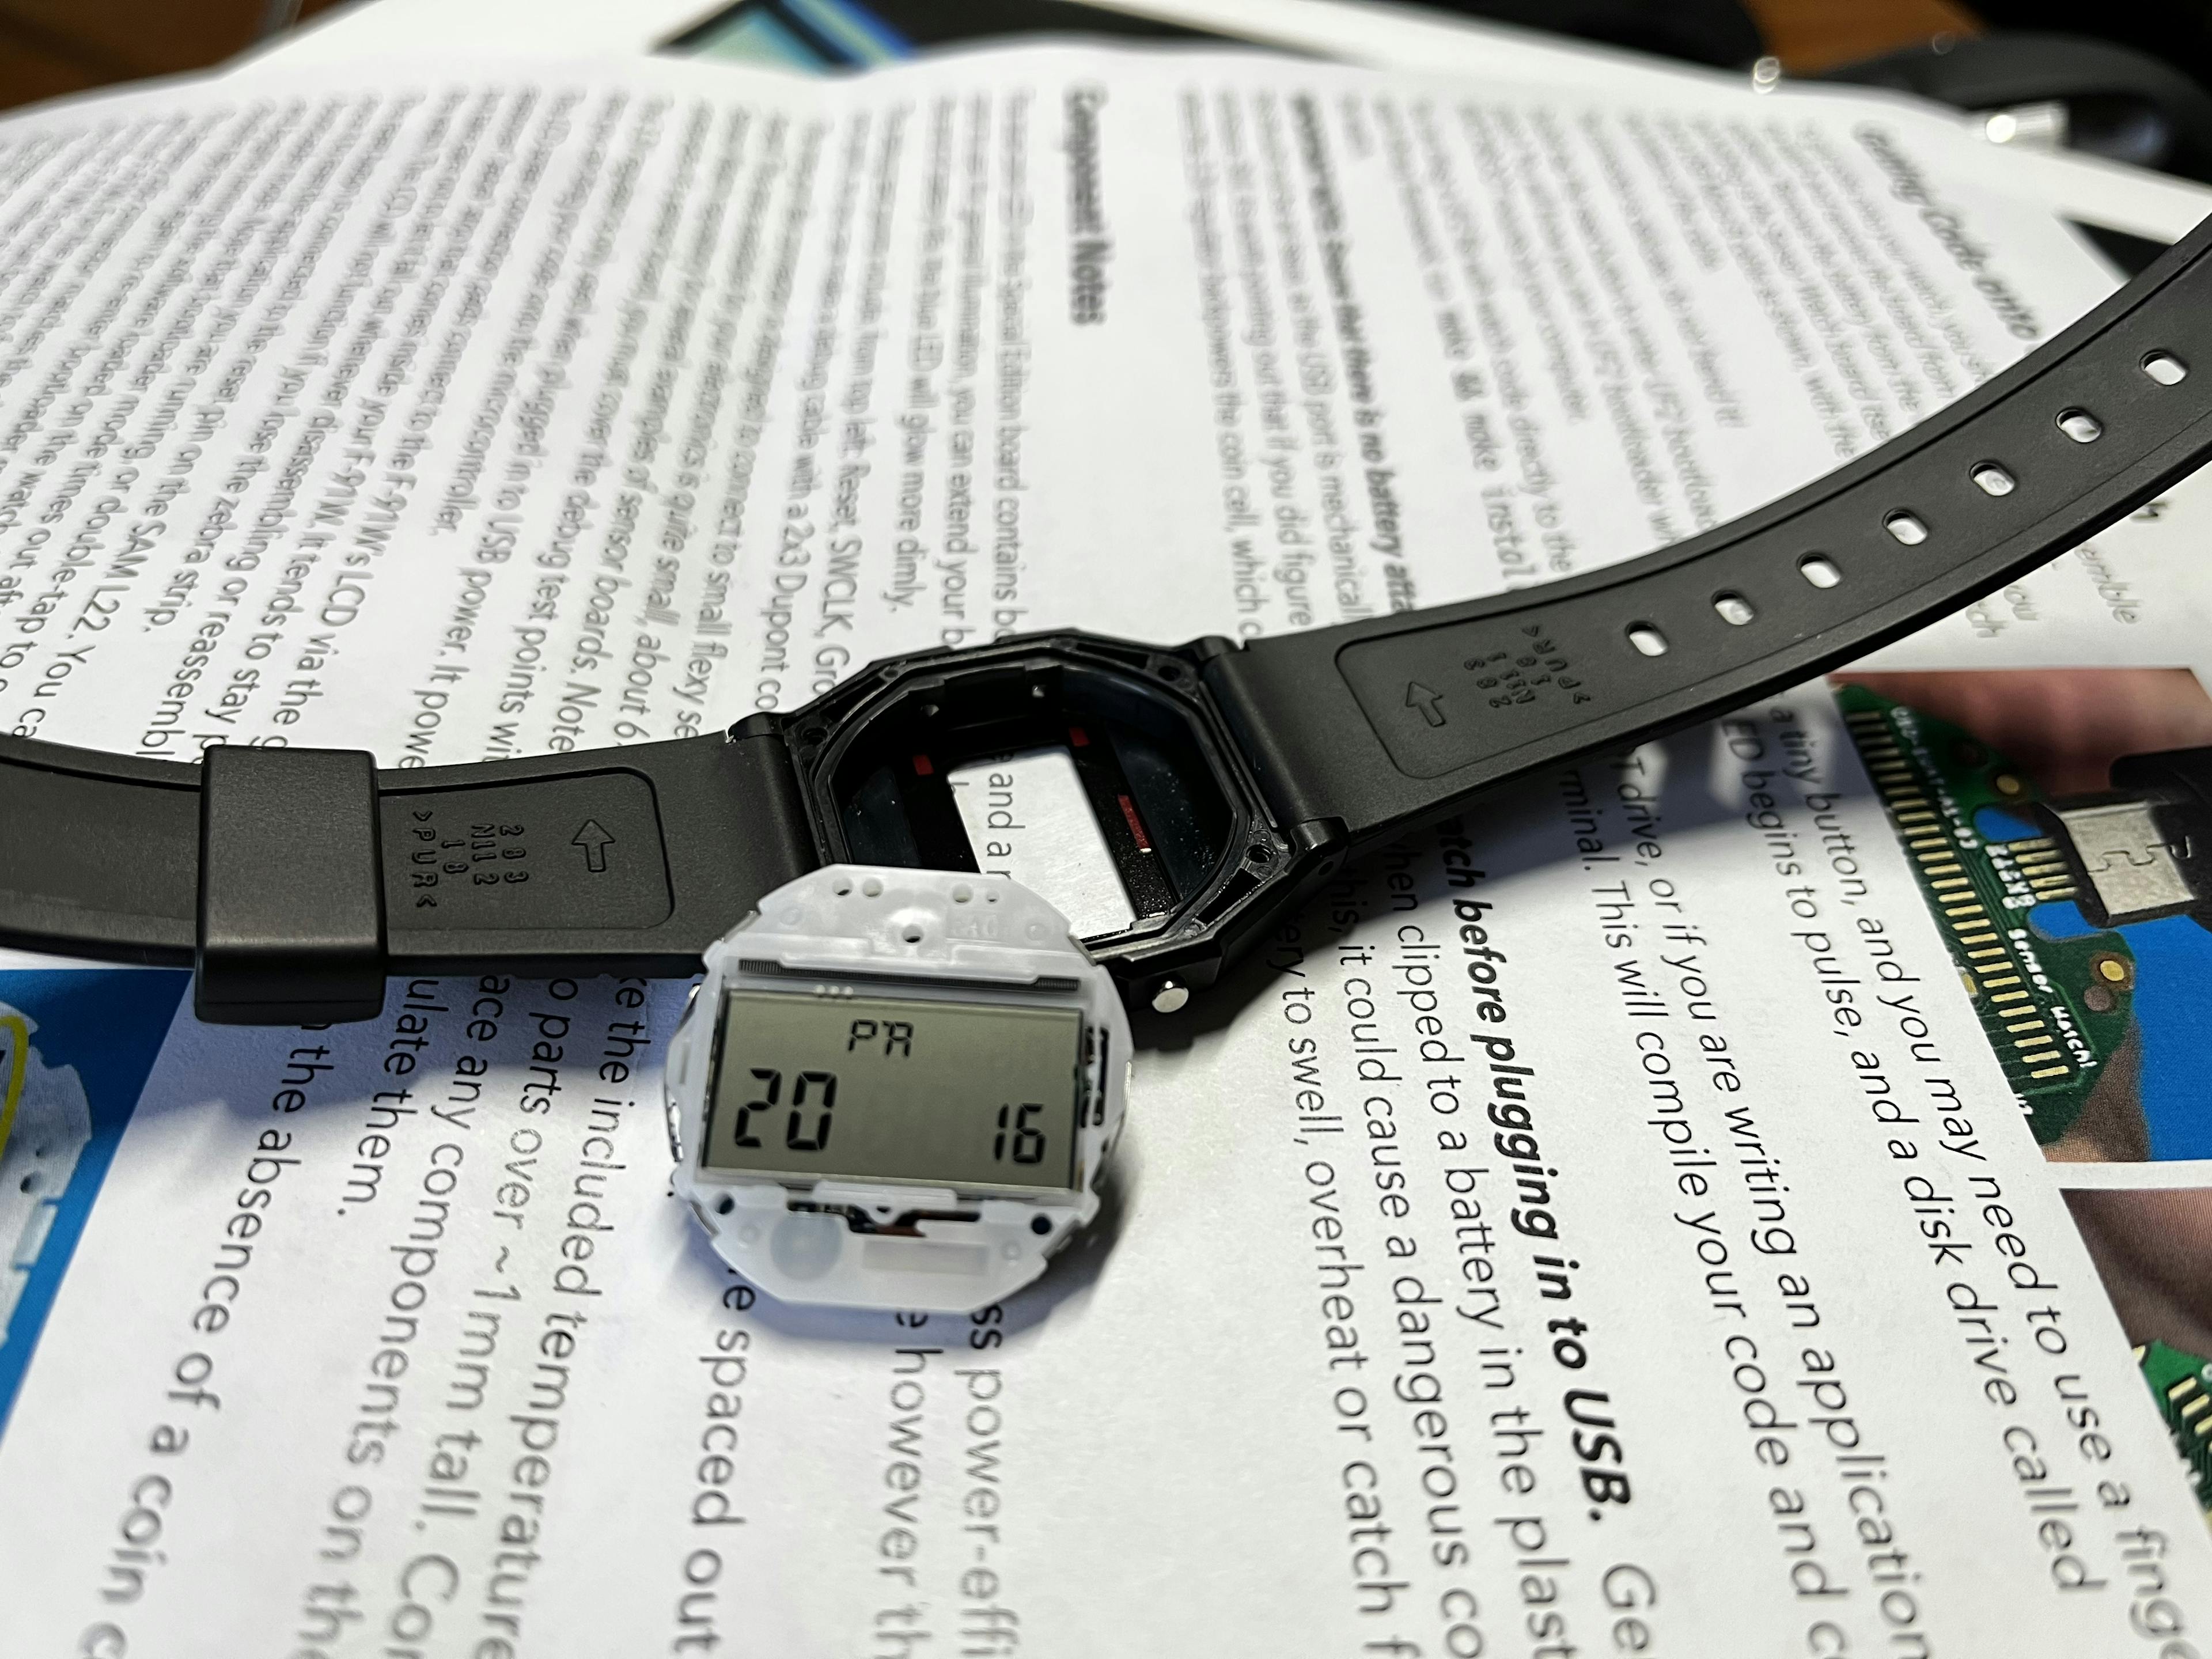 Partially disassembled watch showing a successful probability dice roll.